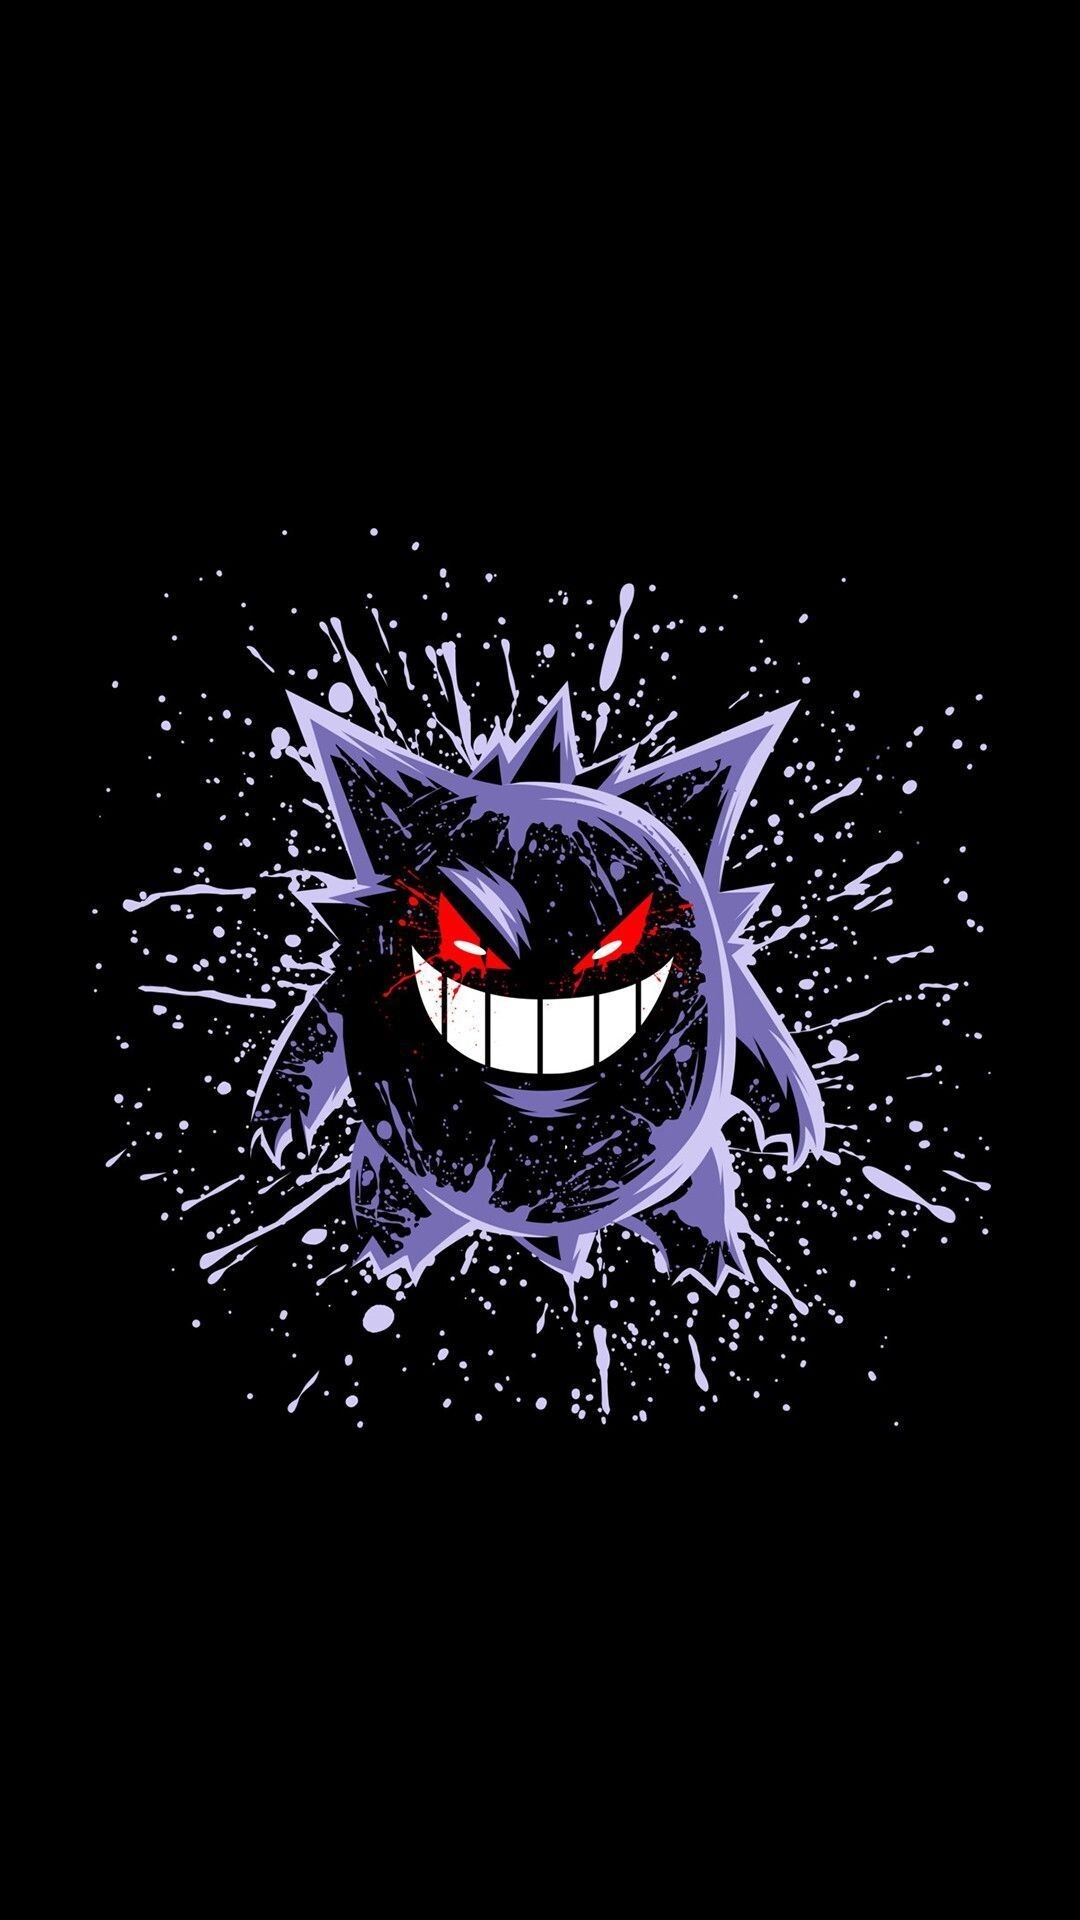 Ghost Pokemon: Gengar, A very mischievous, and at times, malicious species, The master of stealth. 1080x1920 Full HD Wallpaper.